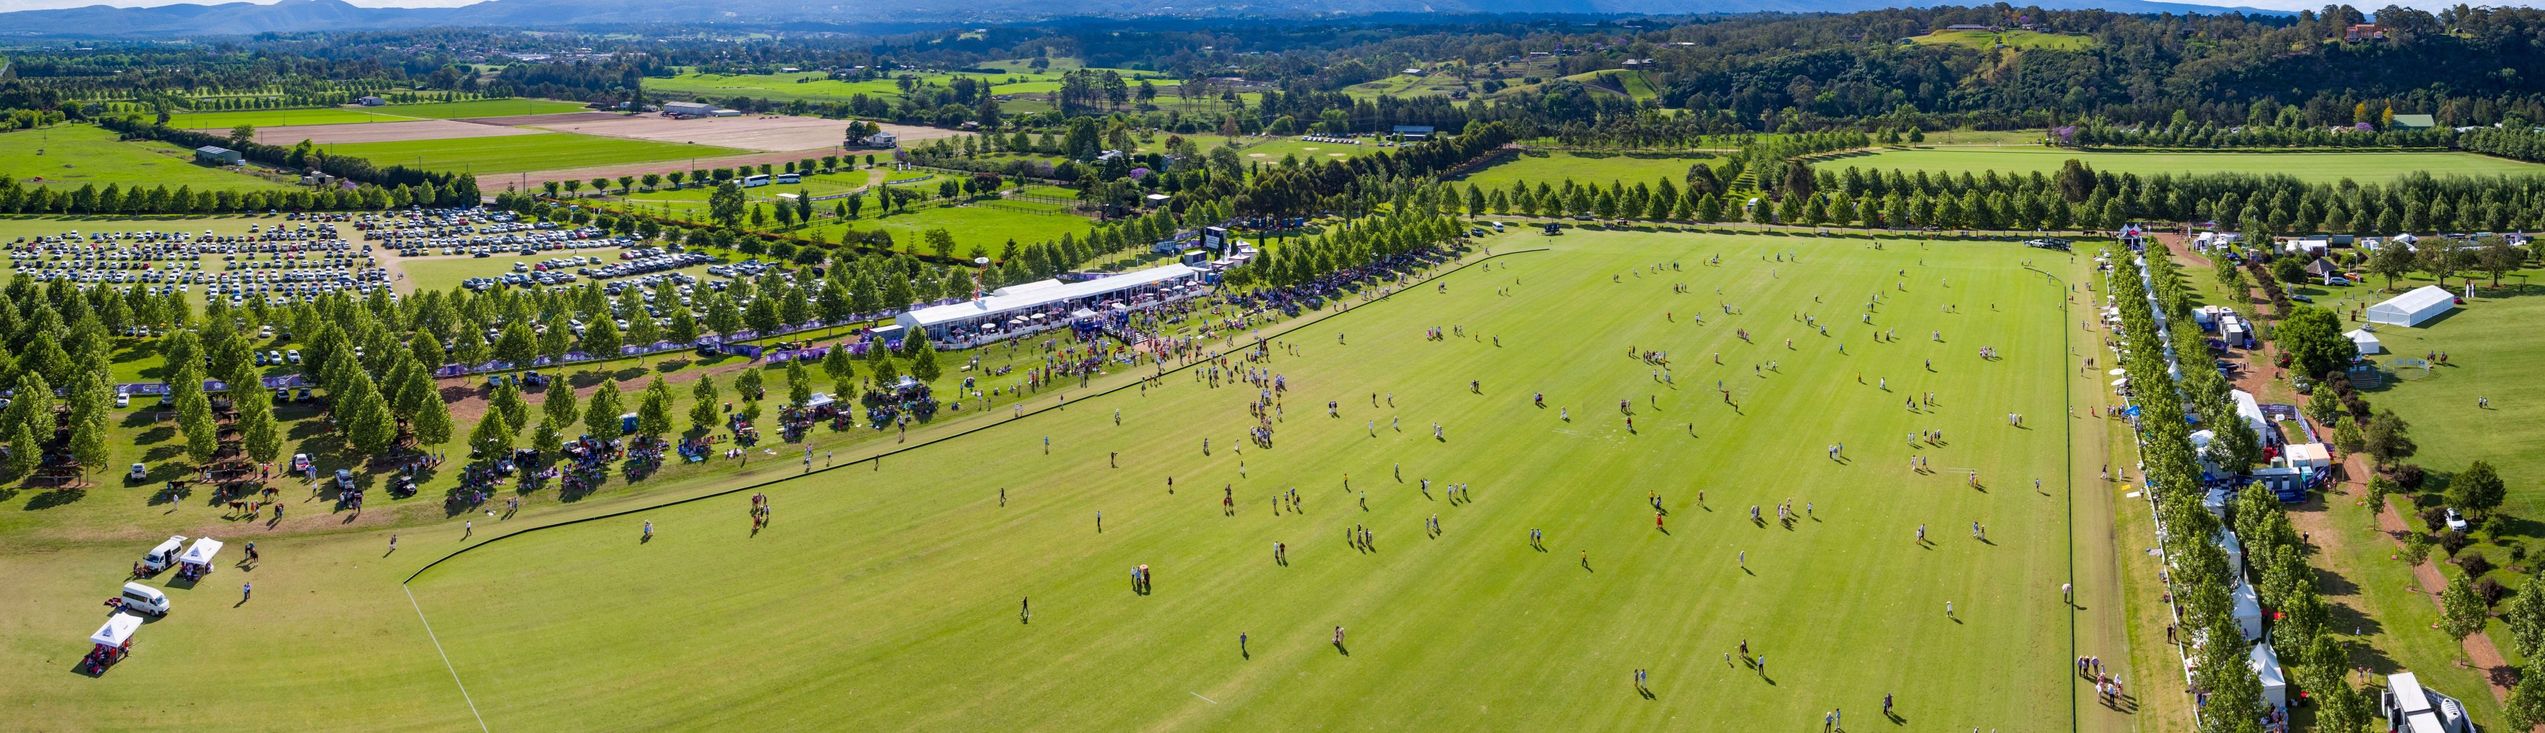 This property is home to 287 acres with world-class facilities including three professional-grade polo fields, a beautiful lagoon, an outstanding equine centre with indoor arenas, extensive stabling, clubhouse and multiple event spaces.